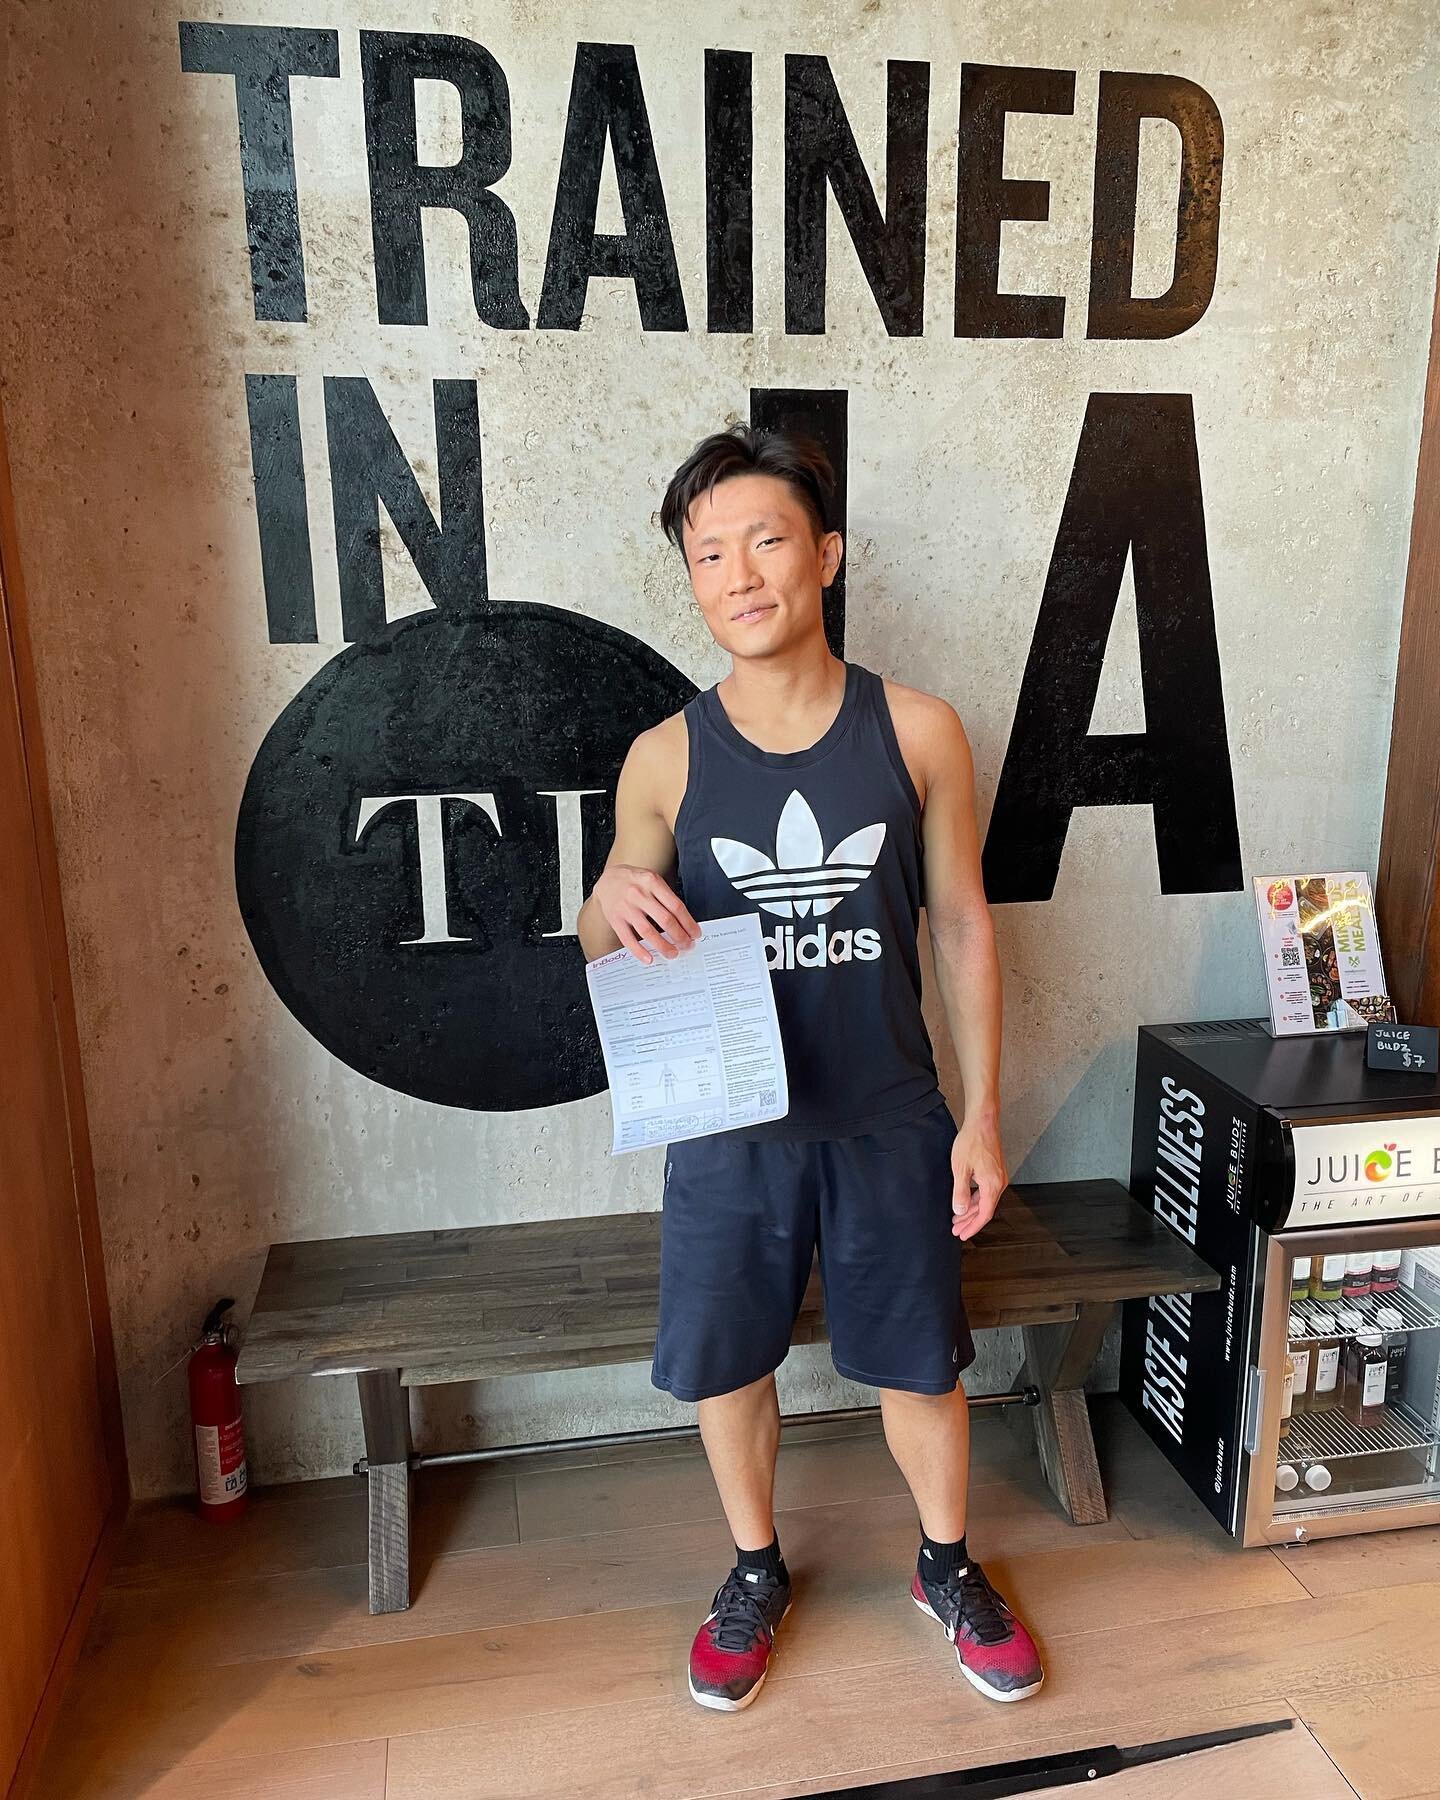 It all begins with you and the decisions you make. 
__
Chan Lee came to us 6 months ago and his goals were to get shredded and feel stronger again. He has exceeded his own personal goals and is the strongest he has ever been. 
__
In 6 months he has